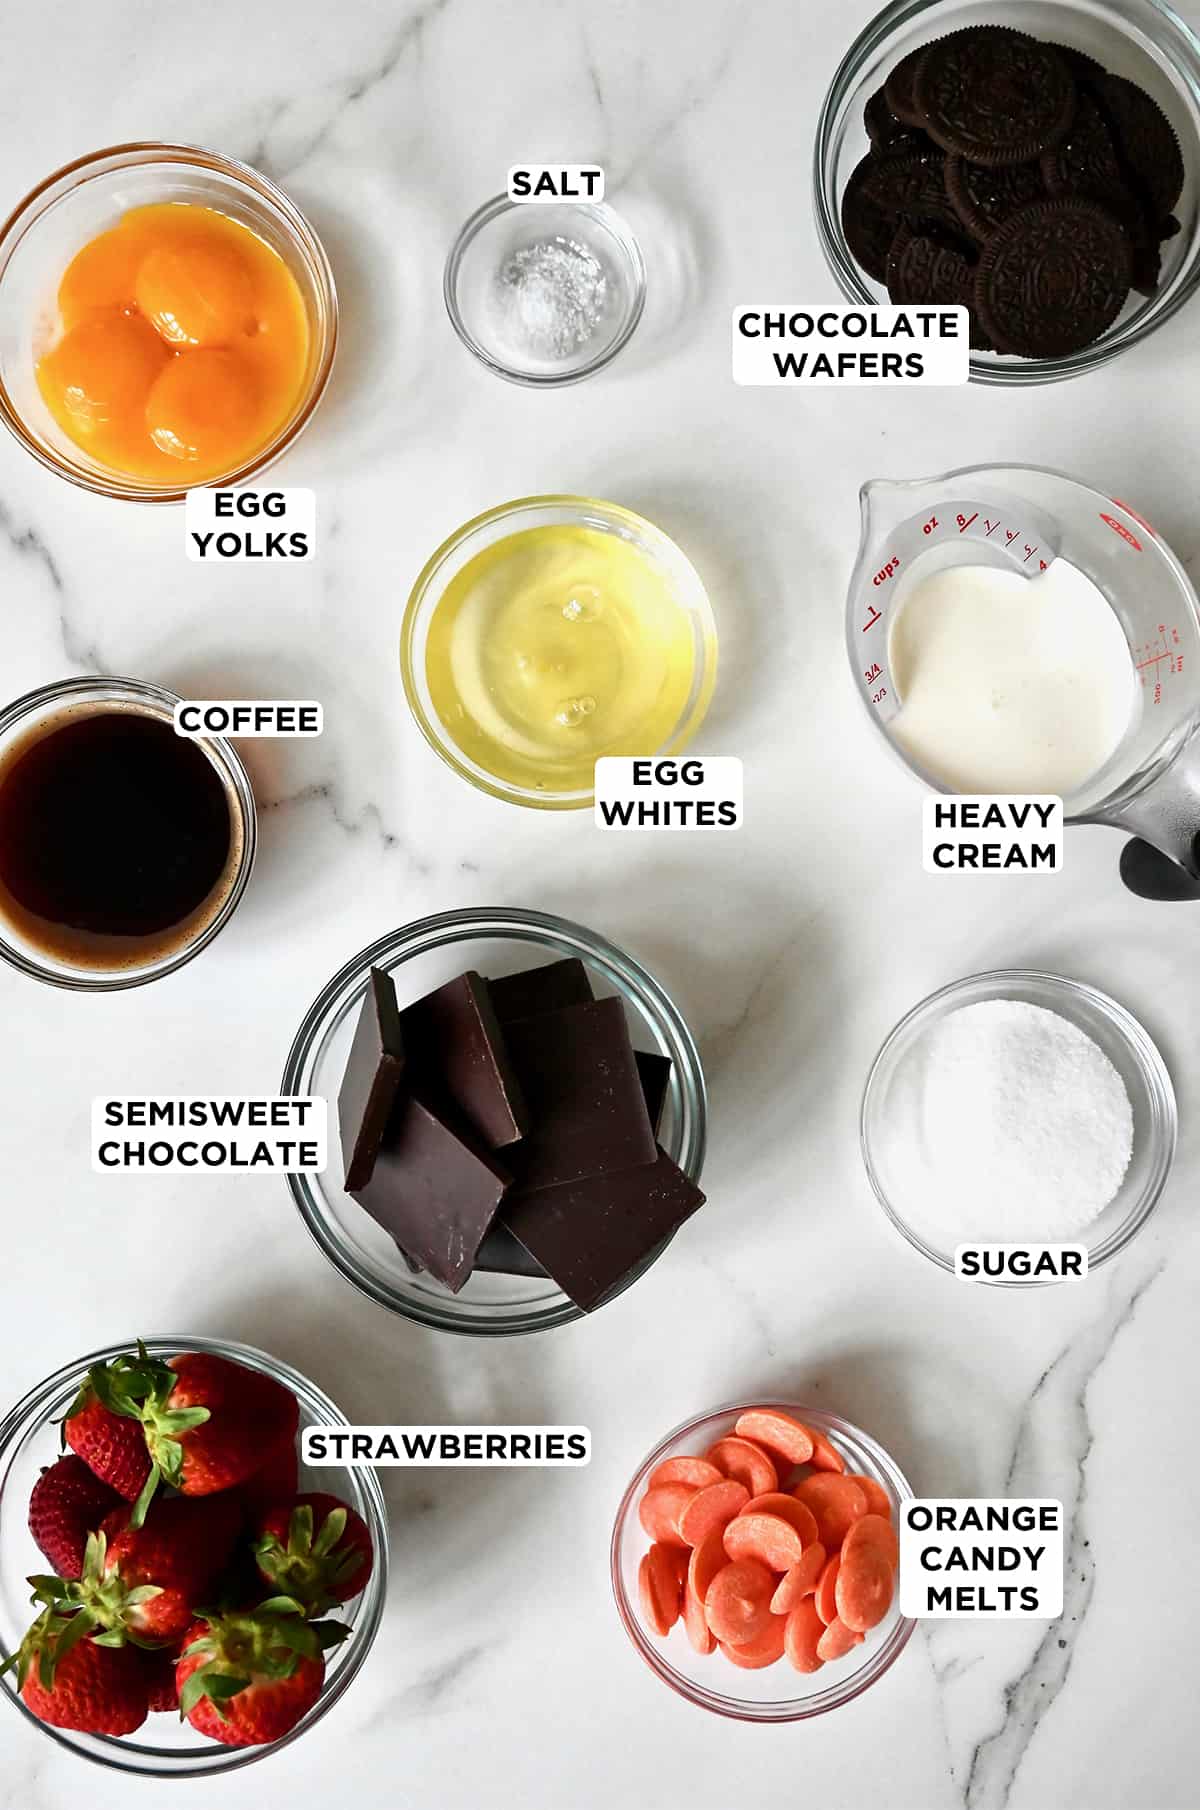 Small glass bowls of strawberries, orange candy melts, sugar, chocolate, coffee, egg whites, heavy cream, chocolate wafers, egg whites and yolks, and salt.